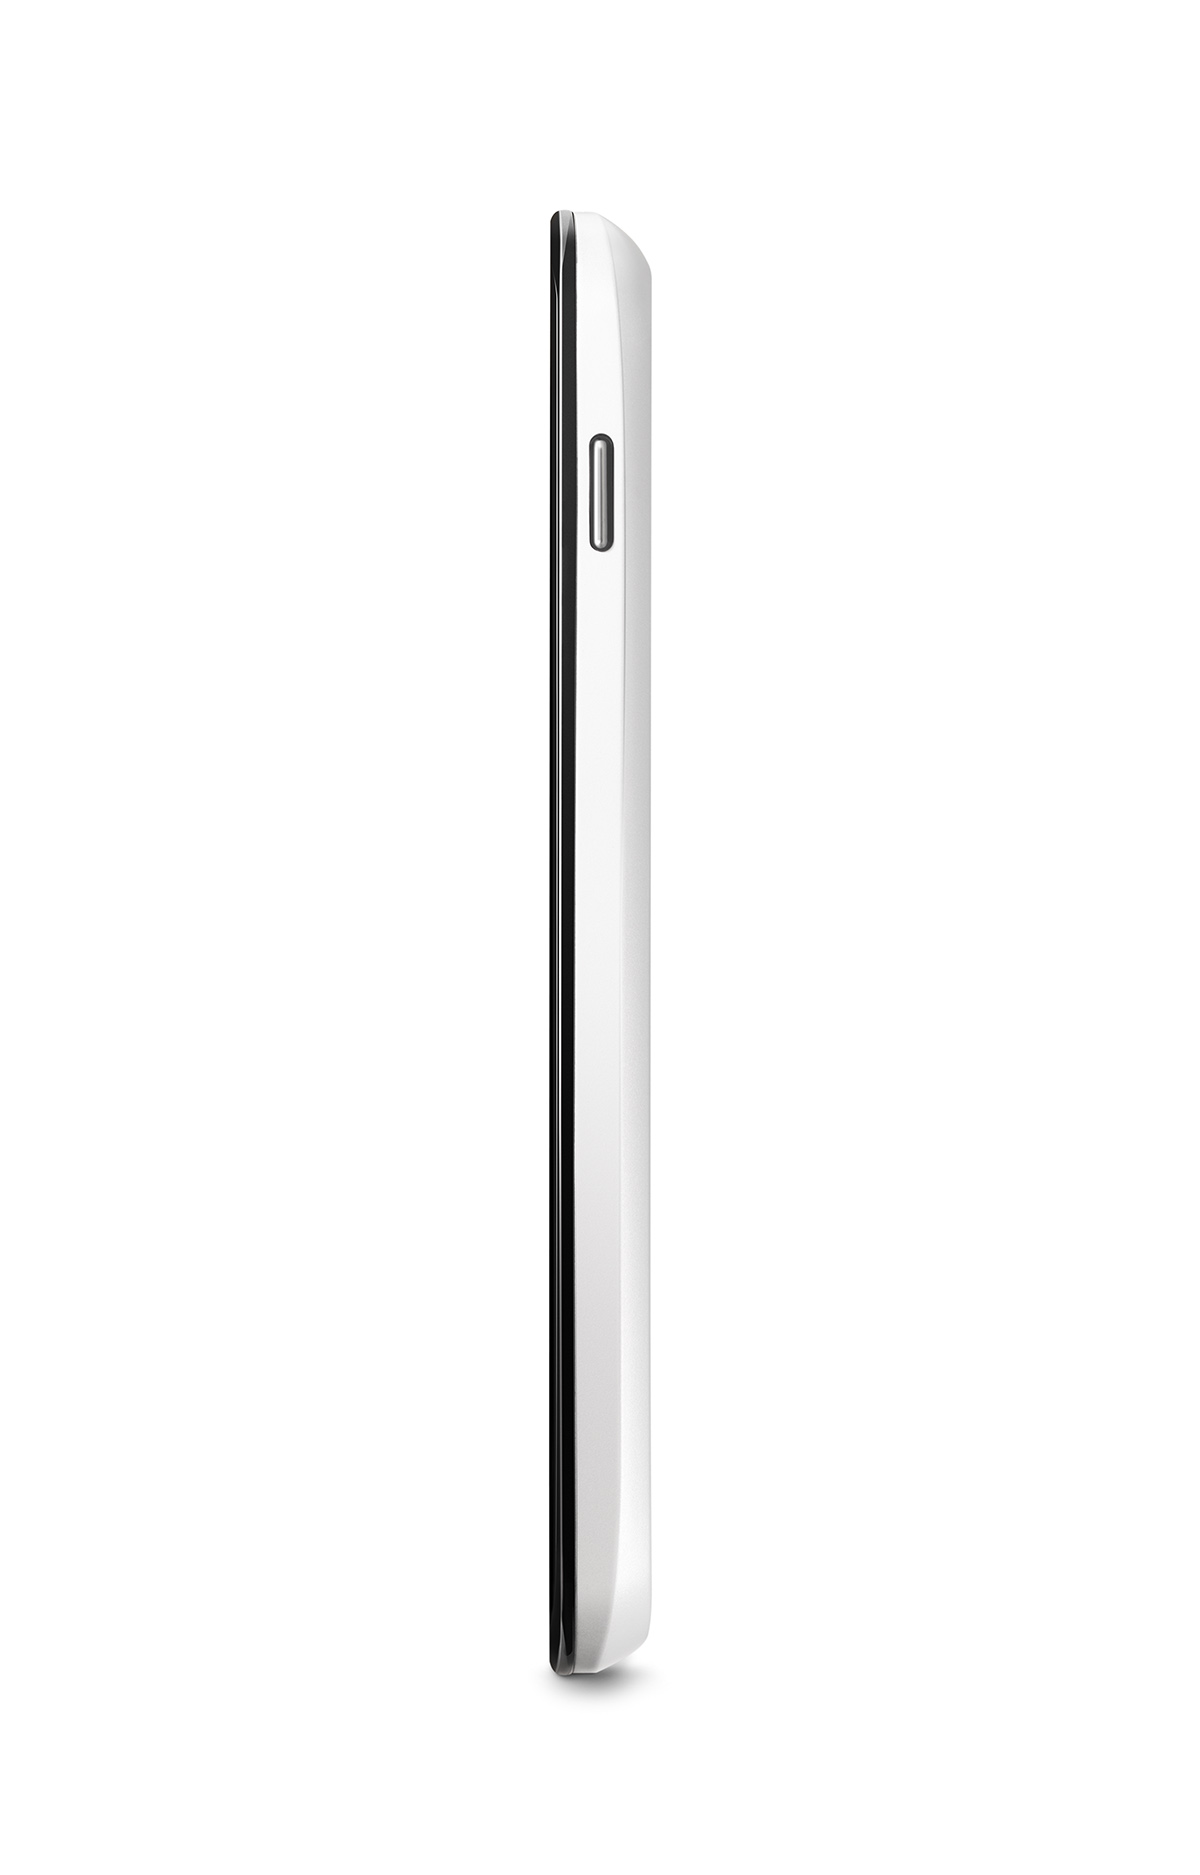 A vertical-side view of the Nexus 4 White